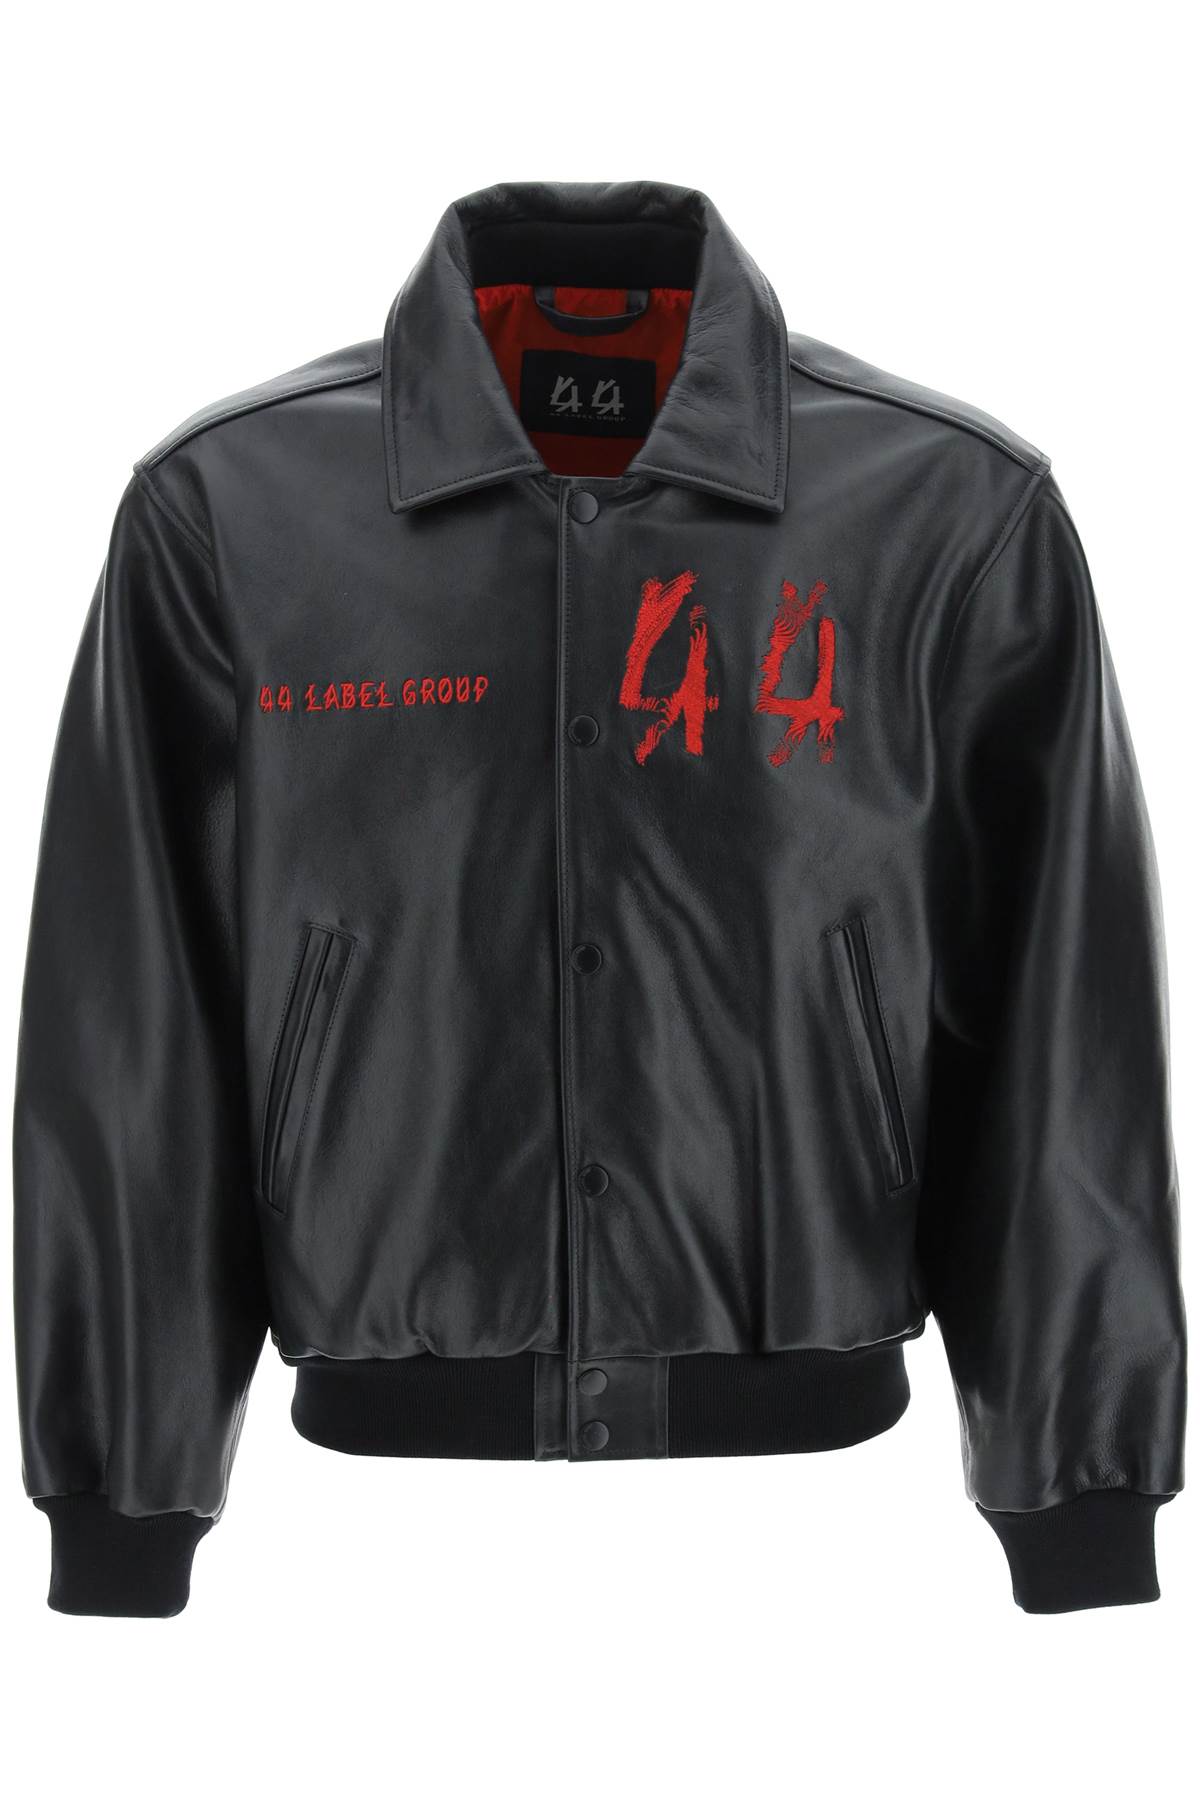 44 Label Group Leather Chaos Bomber Jacket